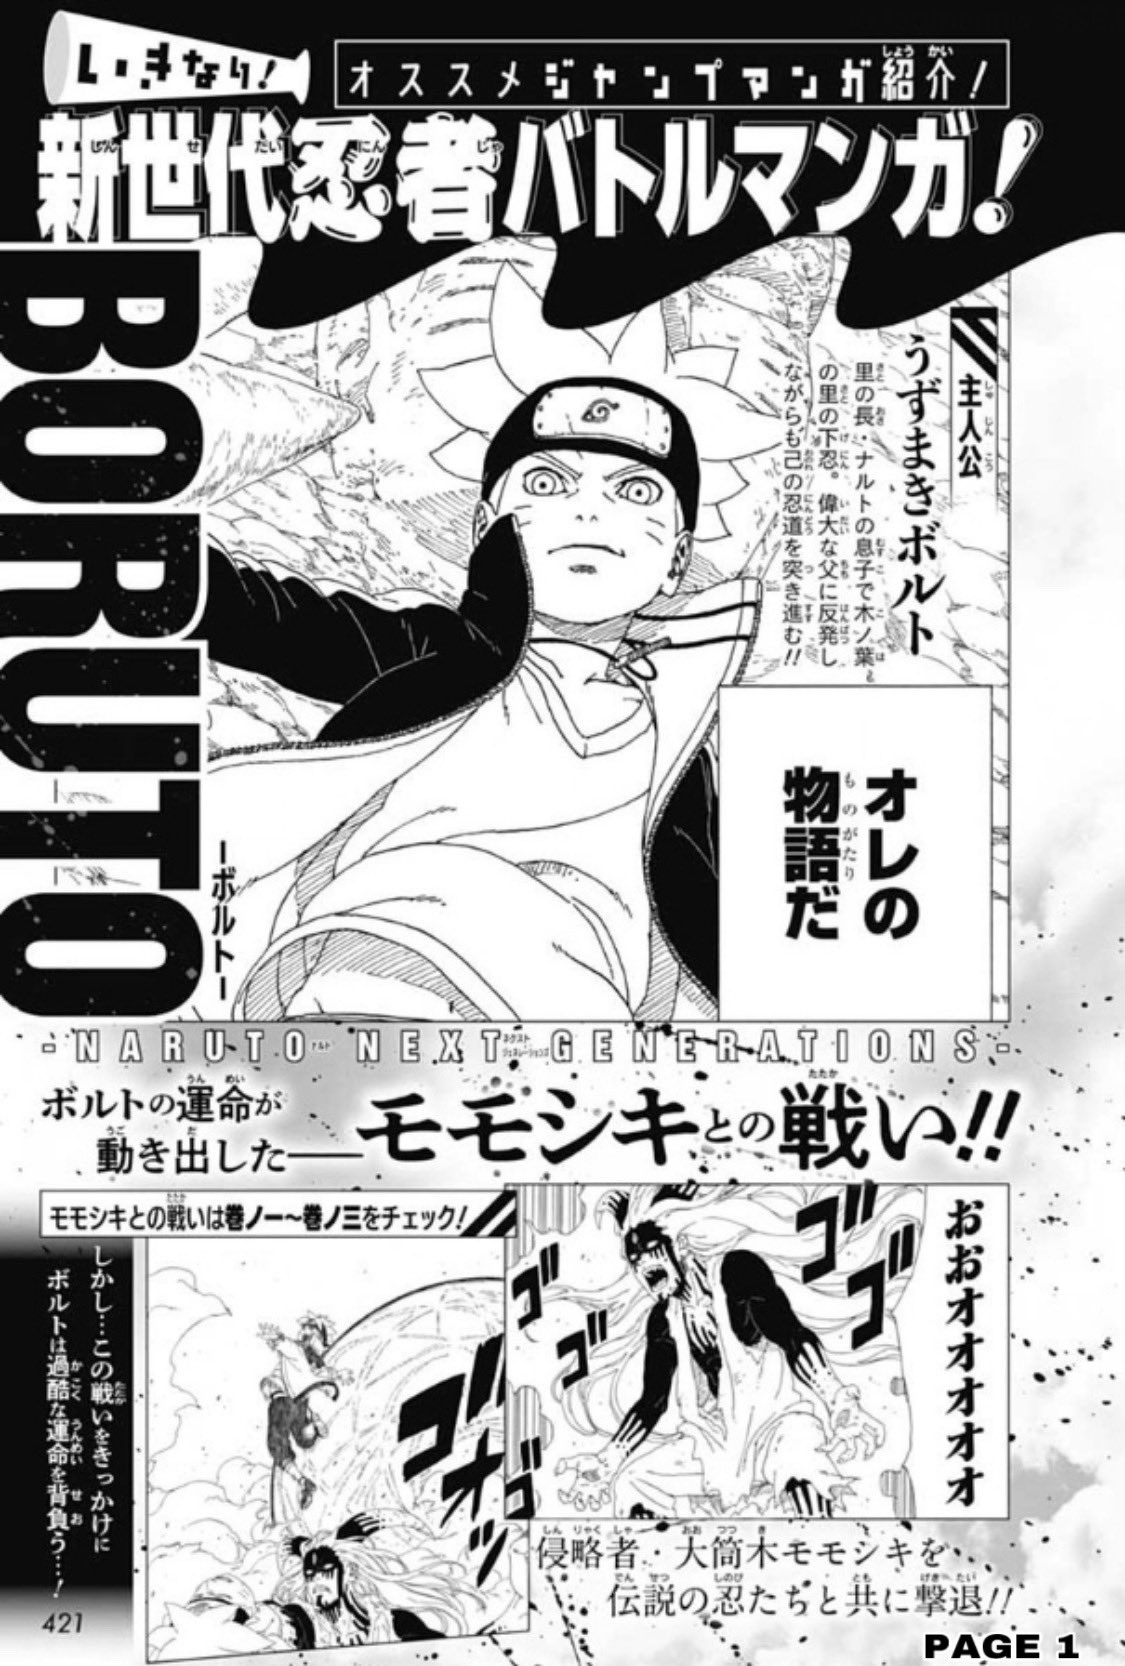 Abdul Zoldyck on X: According to a recent survey conducted by Shonen  Jump+, Boruto: Naruto Next Generations ranks No.5 as the most read/viewed  series on the MangaPlus app (August 2022). The top